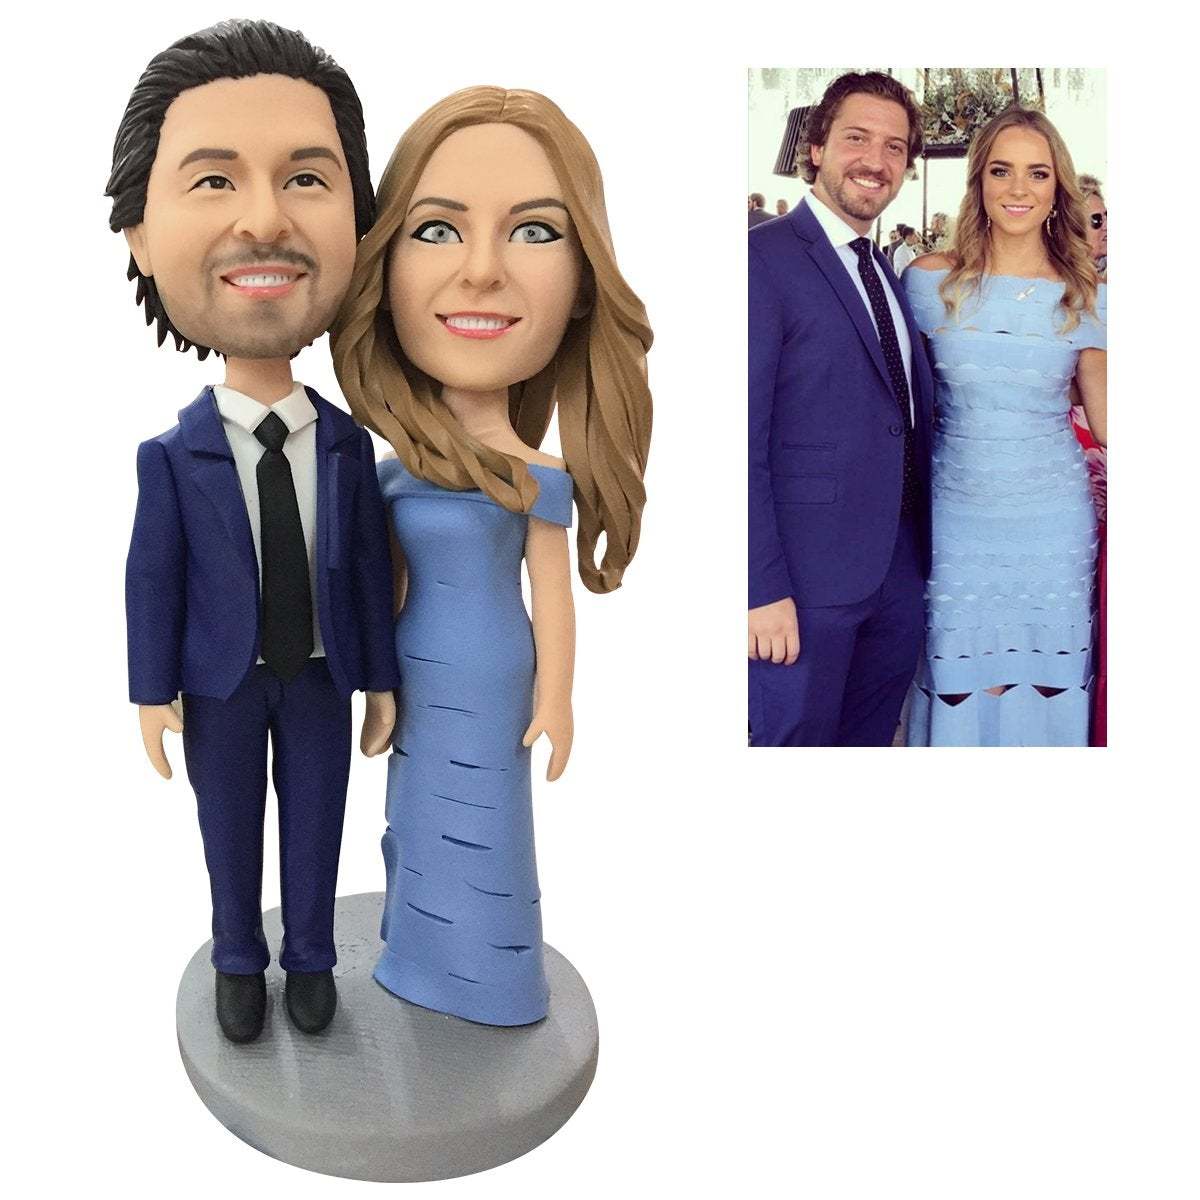 Fully Customizable 2 person Custom Bobblehead With Engraved Text